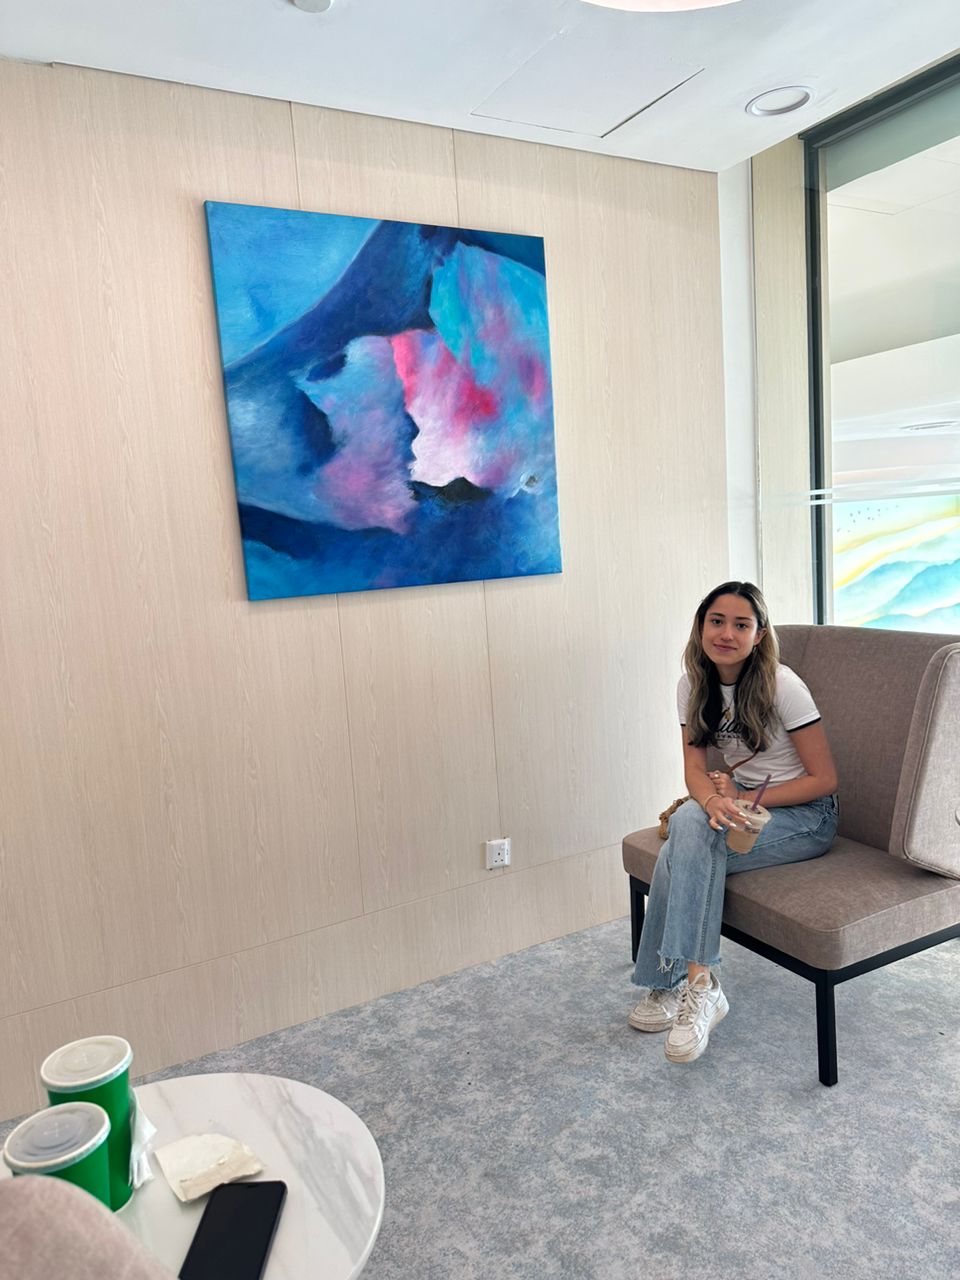 Affordable Custom Made Hand-painted Modern Vibrant Minimalist Blue and Gold Abstract Oil Painting In Malaysia Office/ Home @ ArtisanMalaysia.com